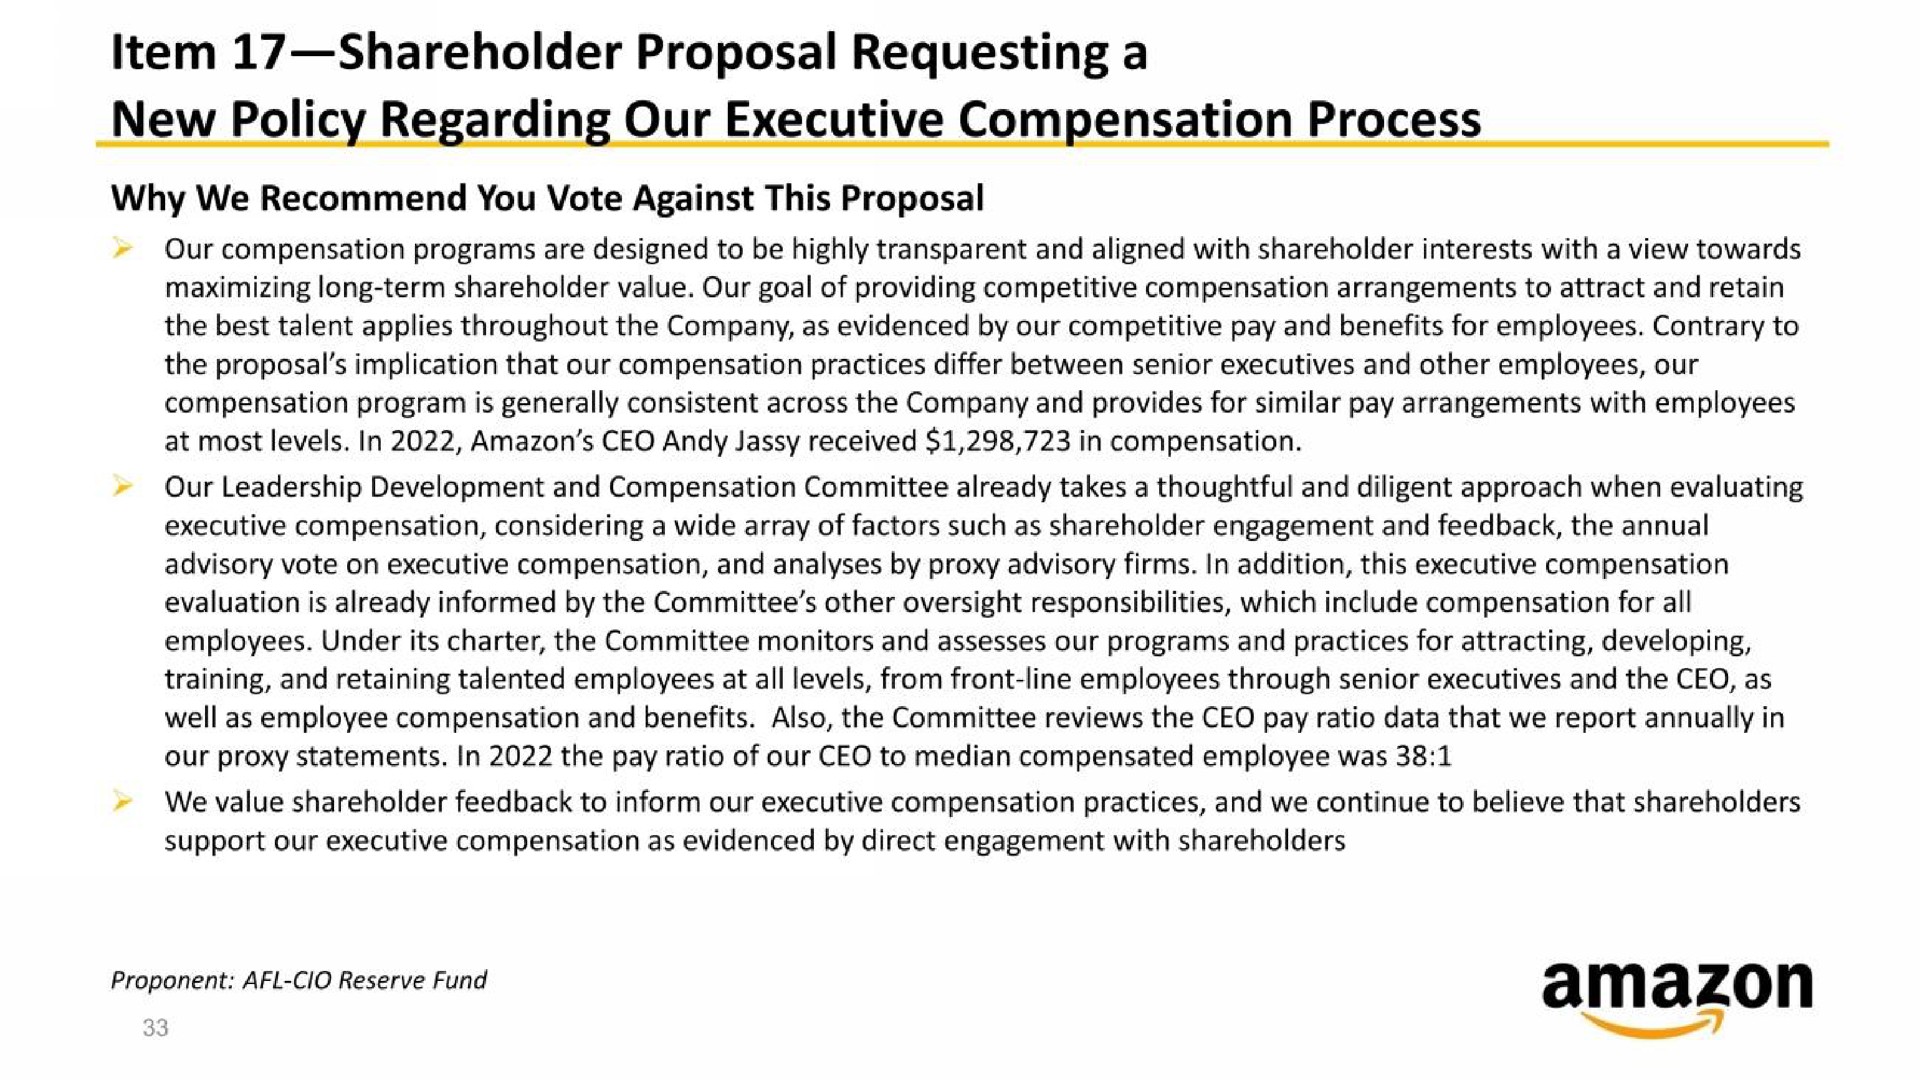 item shareholder proposal requesting a new policy regarding our executive compensation process | Amazon